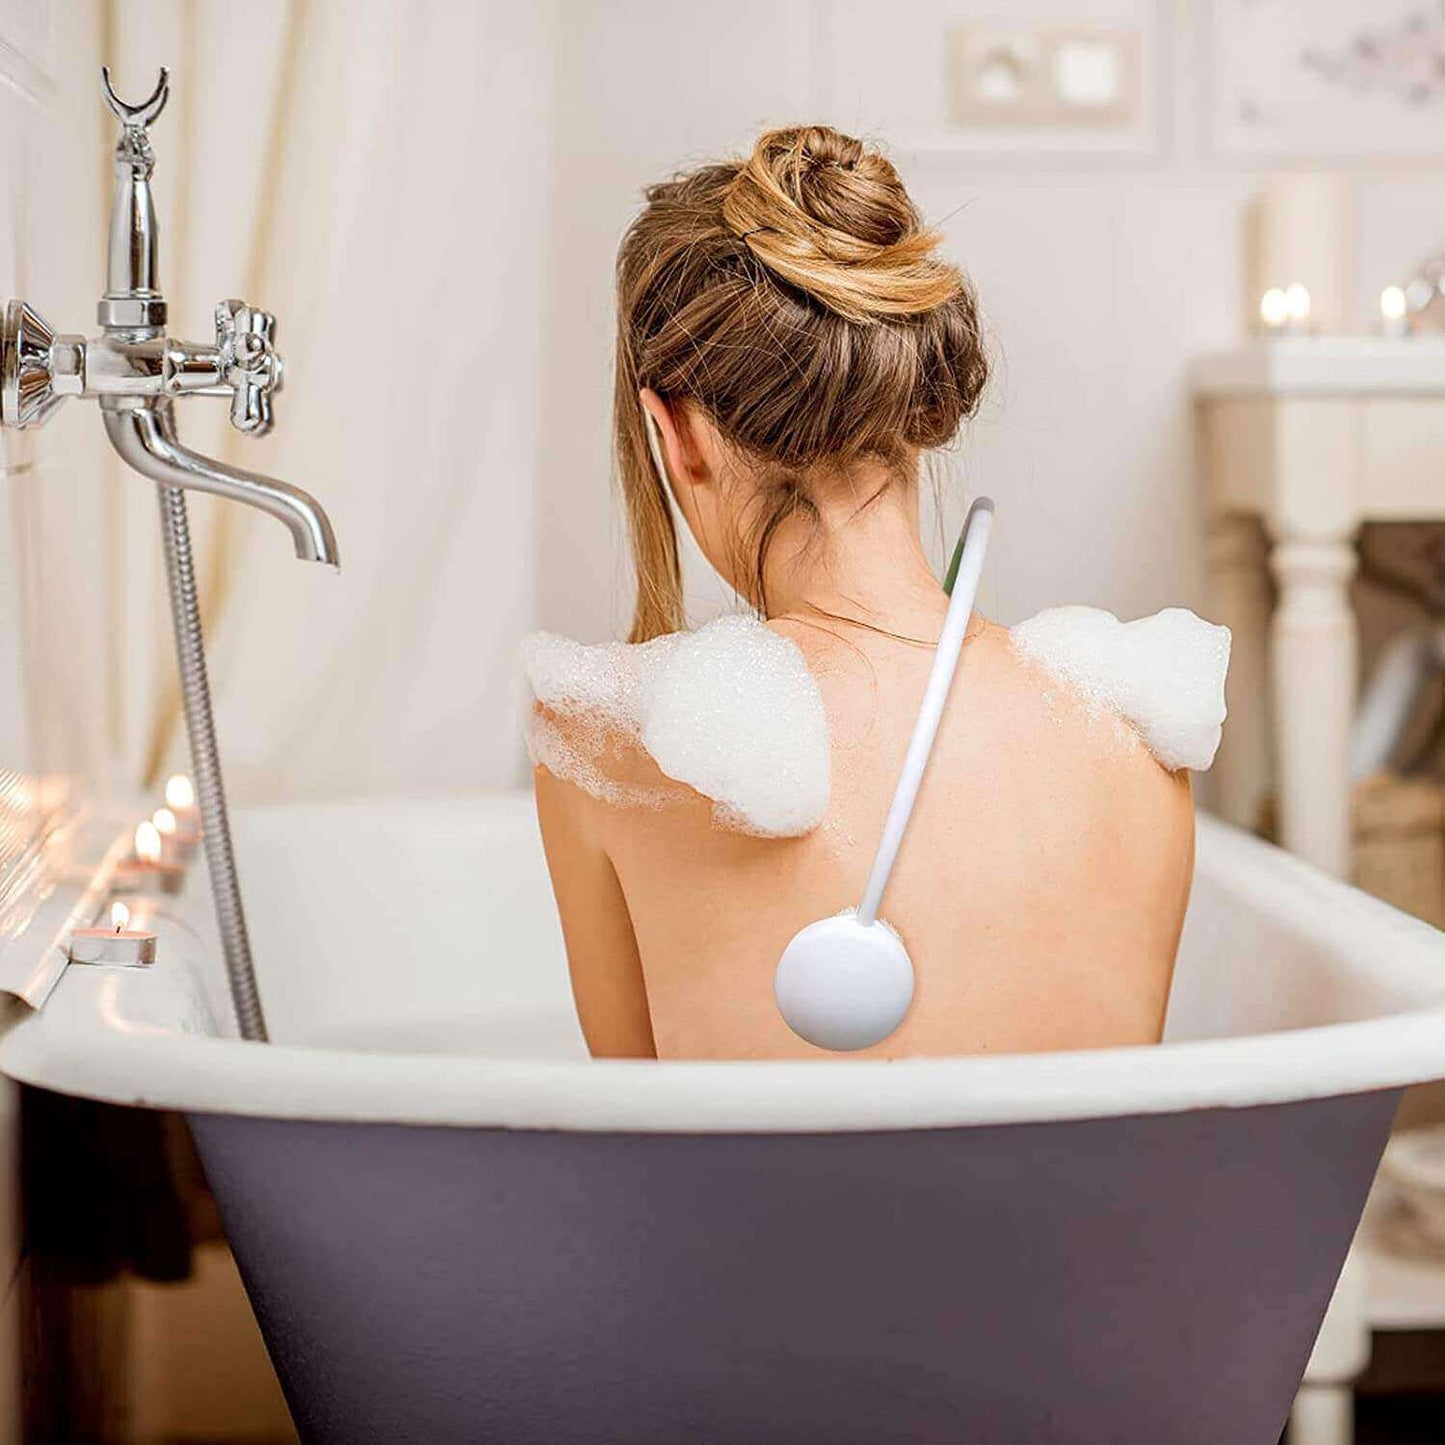 2 Pcs Fanwer curved long-handled bath brushes, a woman is using the item